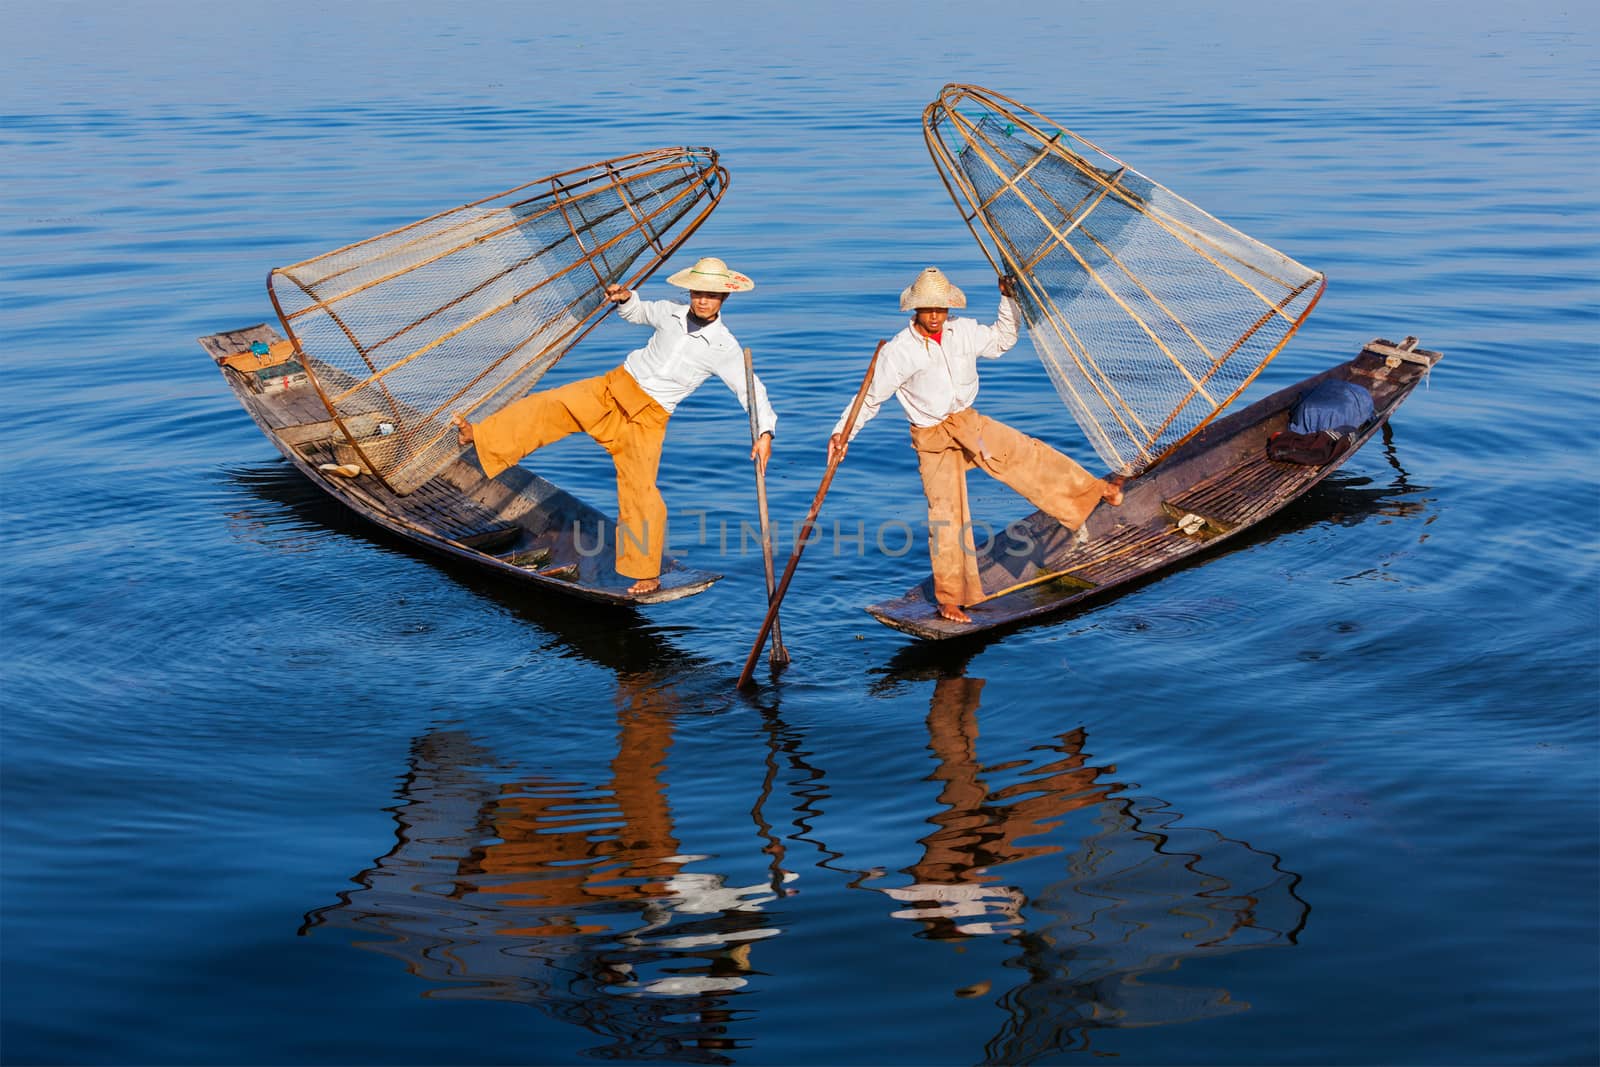 Myanmar travel attraction landmark - Traditional Burmese fishermen balancing with fishing net at Inle lake in Myanmar famous for their distinctive one legged rowing style